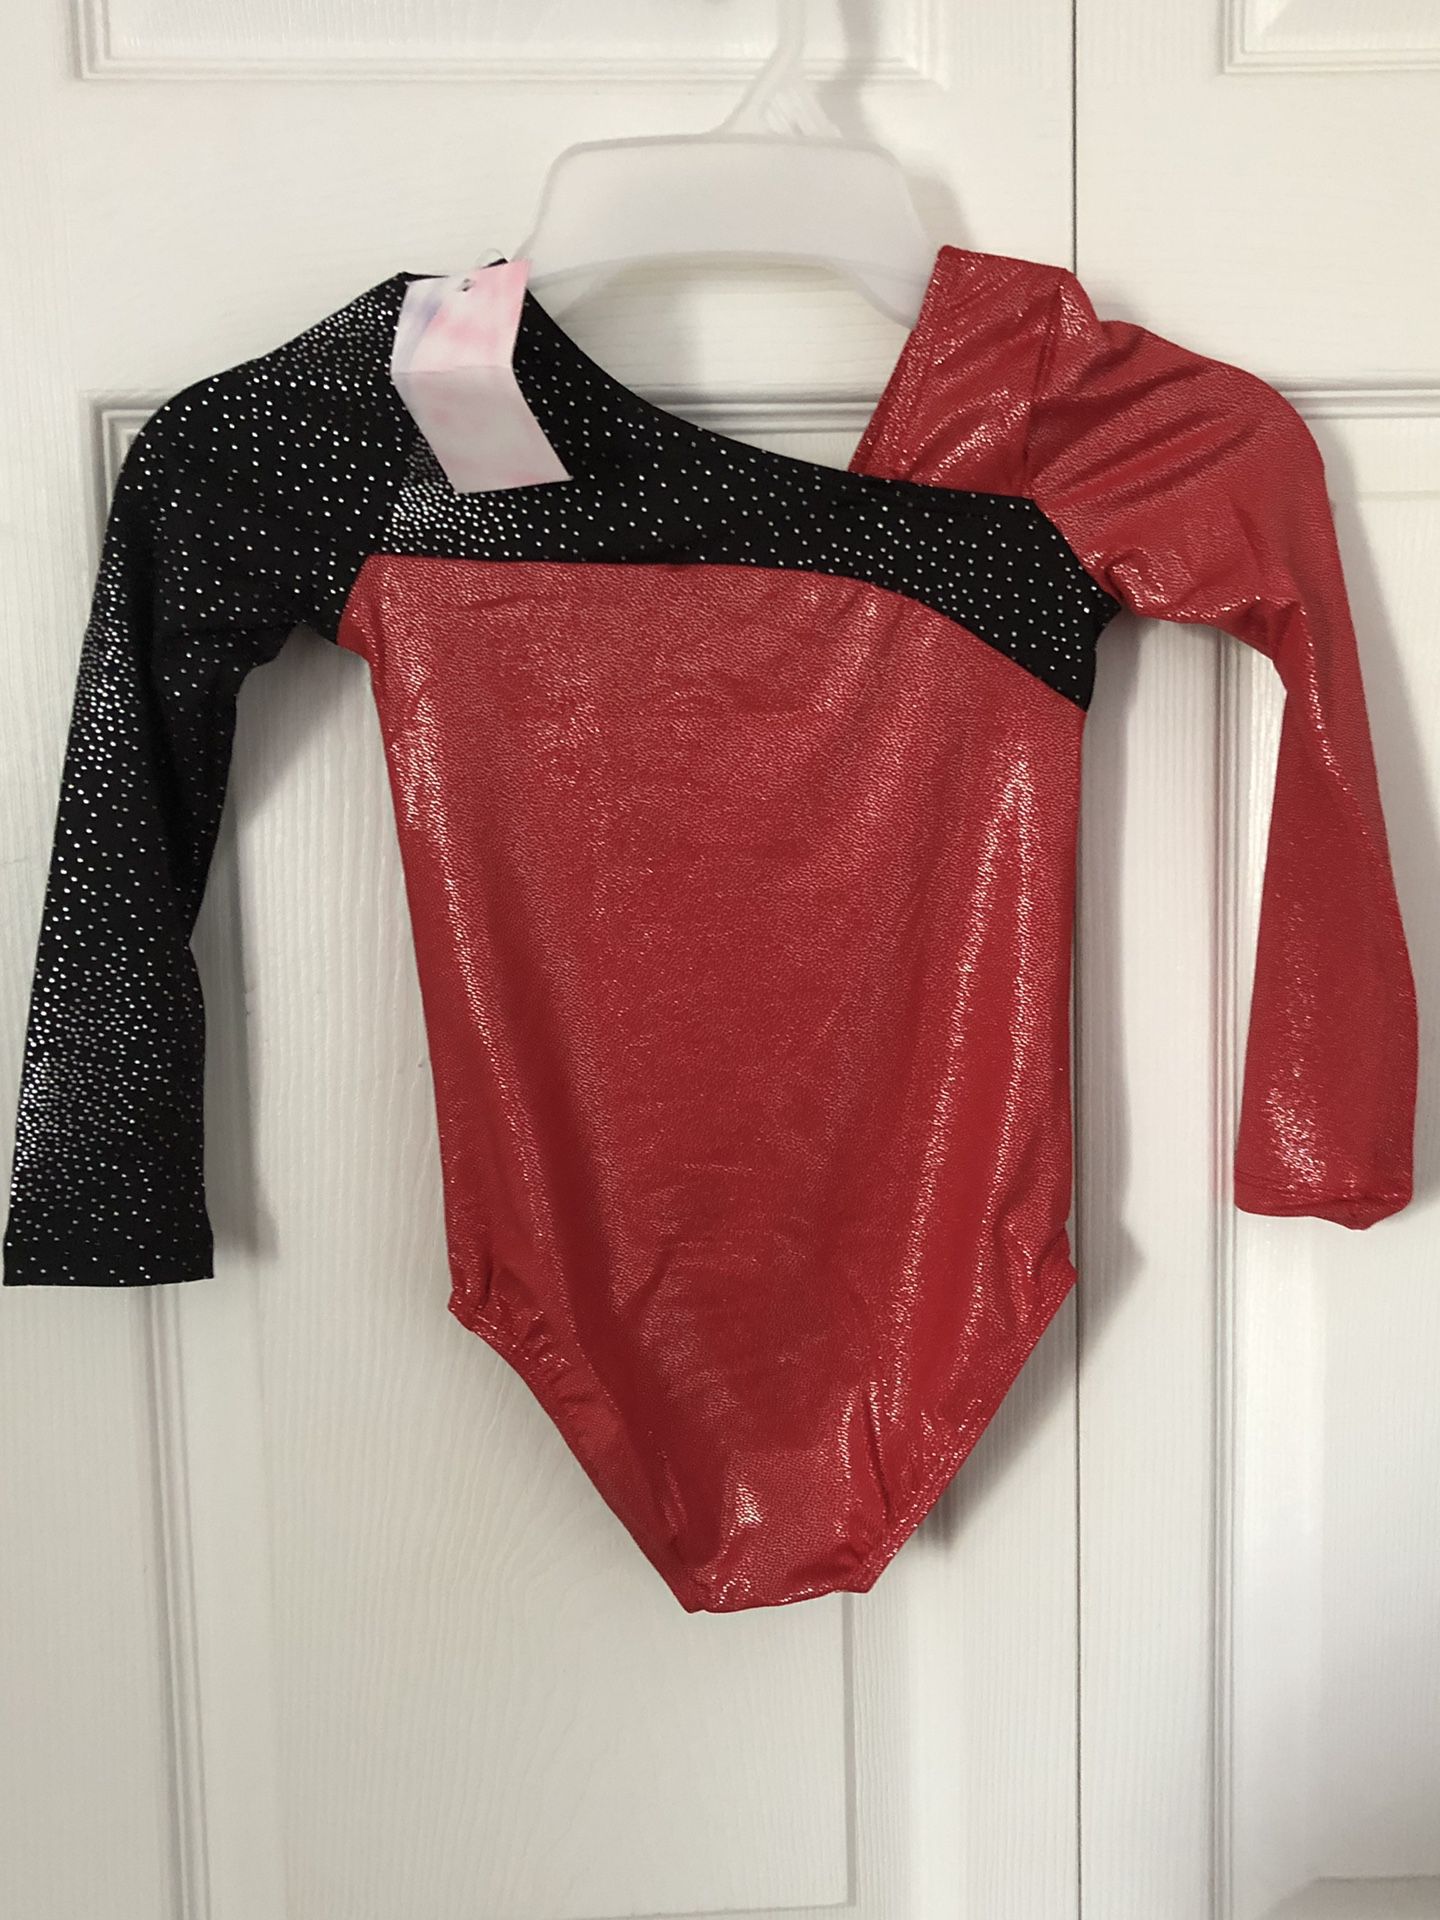 Brand new Leotard for Girls Children Gymnastics Long Sleeve Dance Shiny Purple Red Black size 4-5y (pick up only)